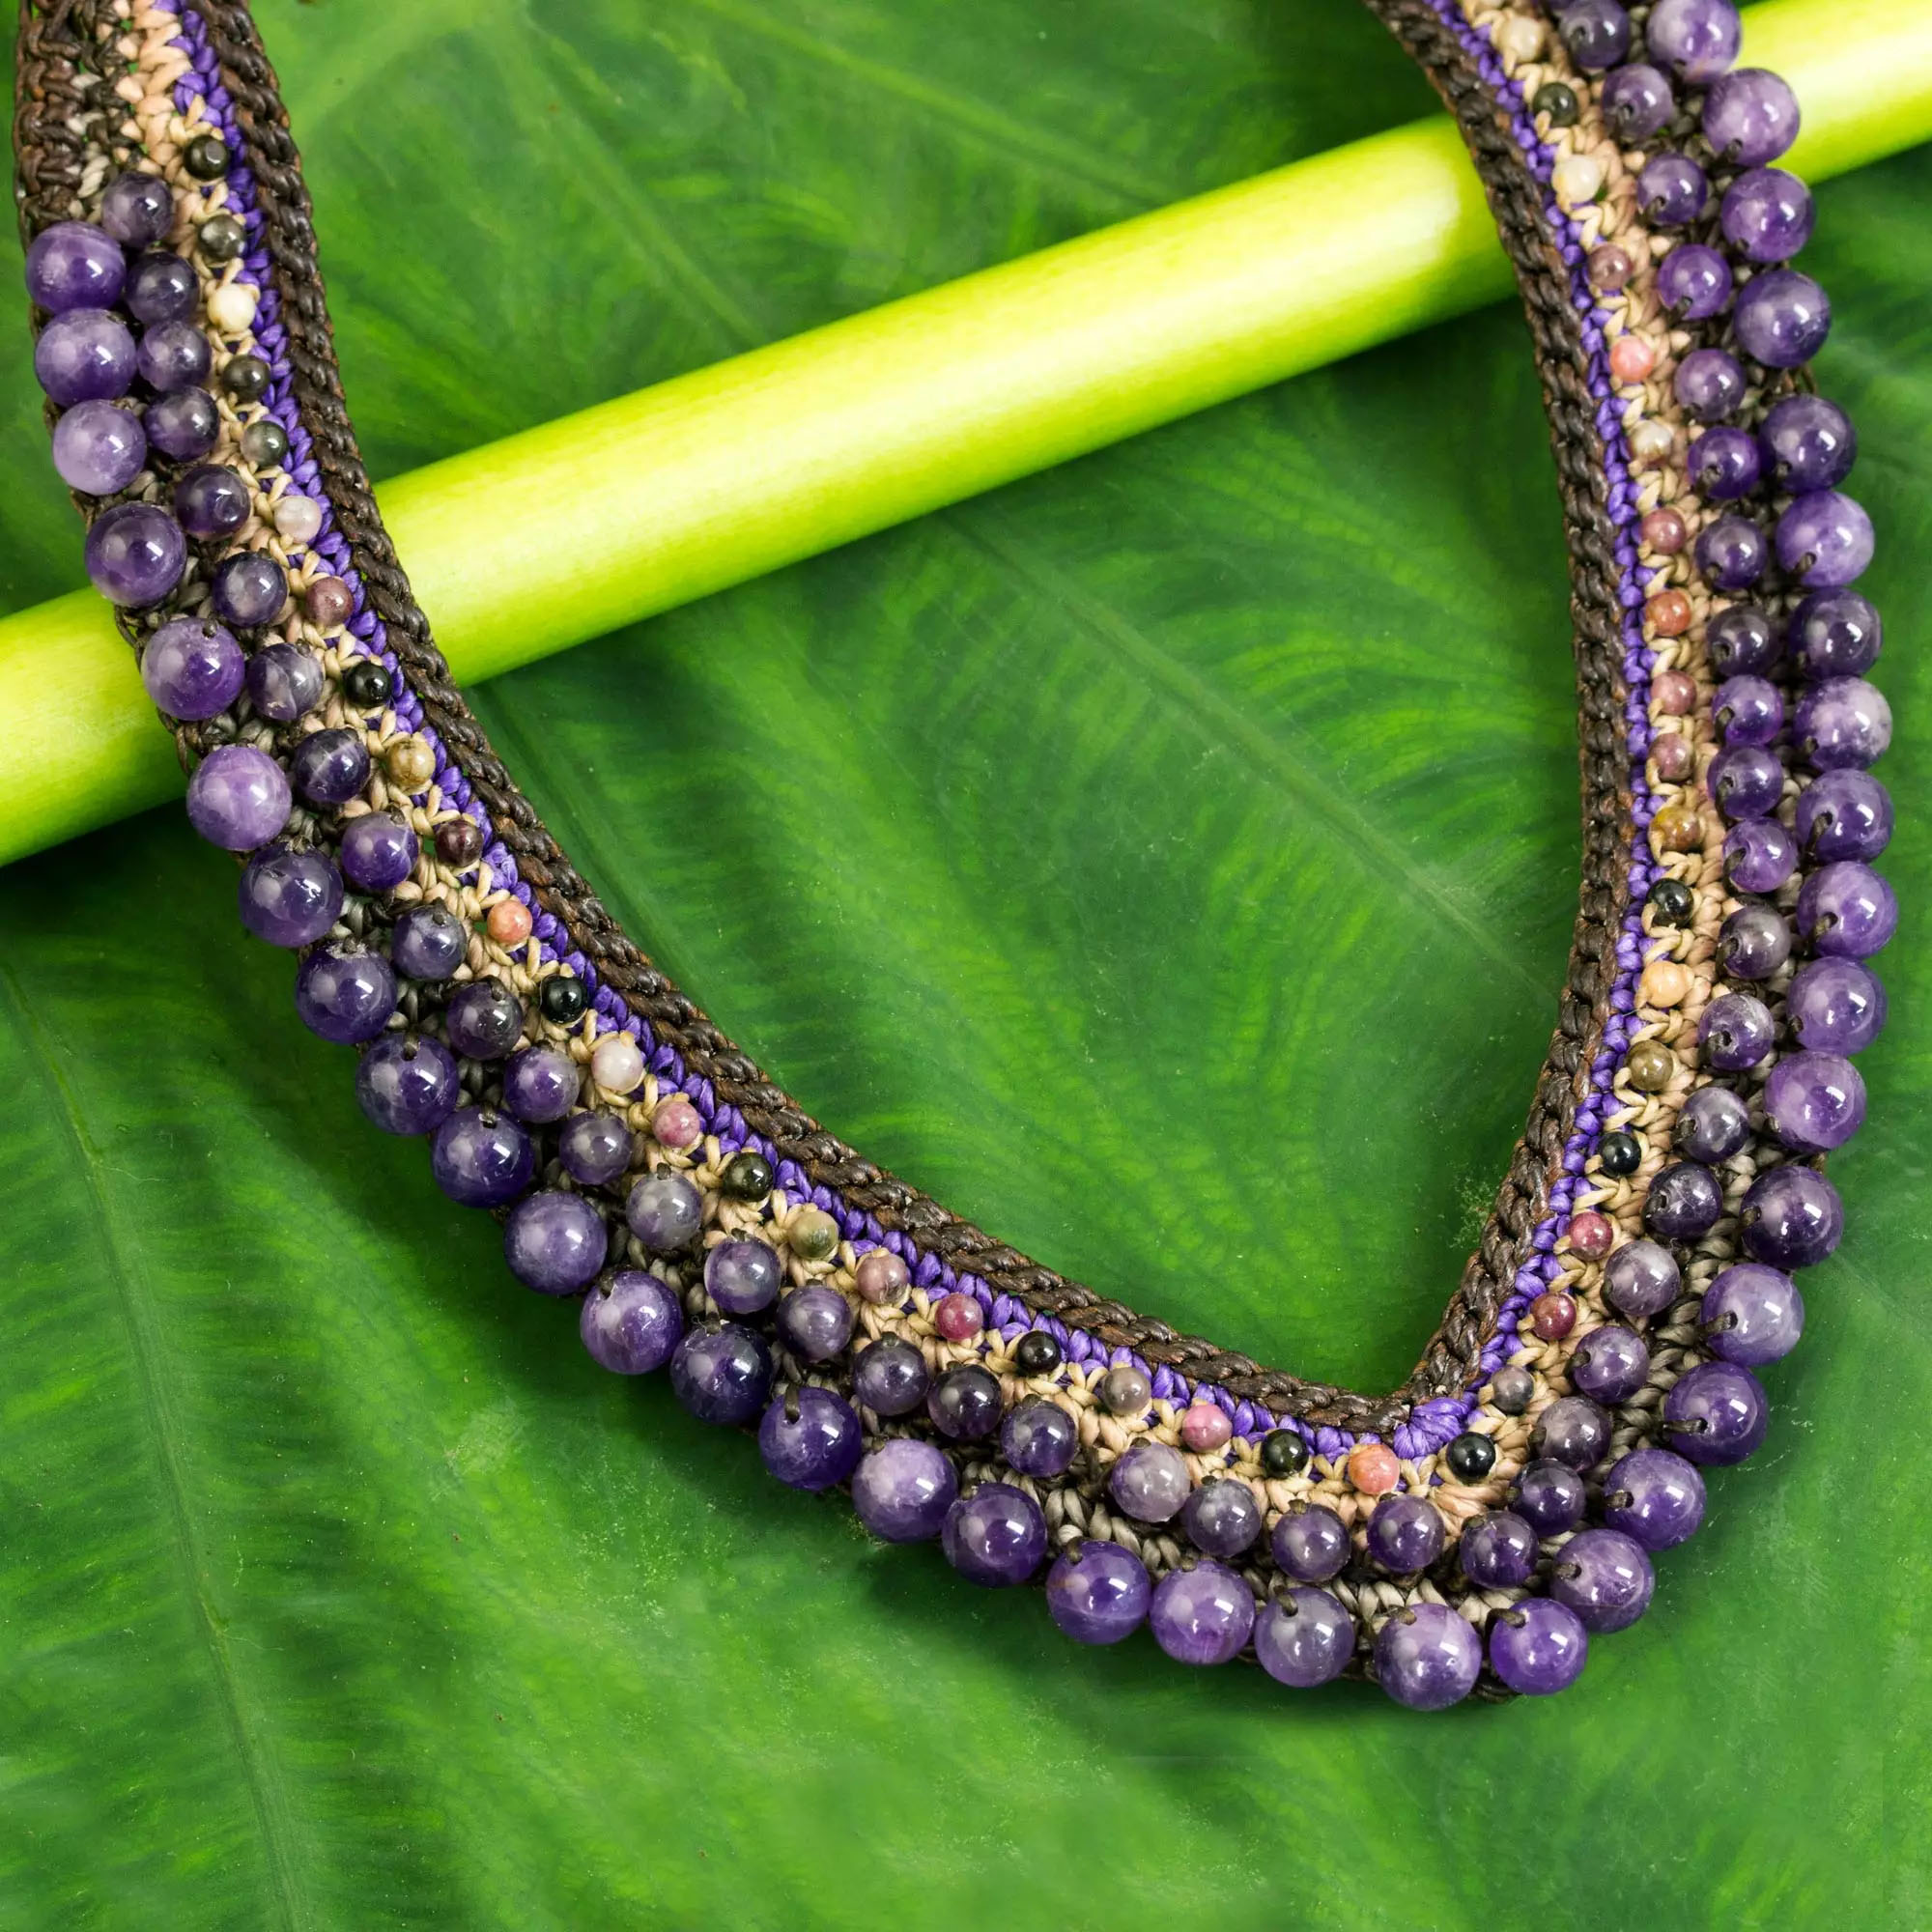 ‘Violet Whispers’ Beaded Tourmaline and Amethyst Necklace Earring and Necklace Pairings